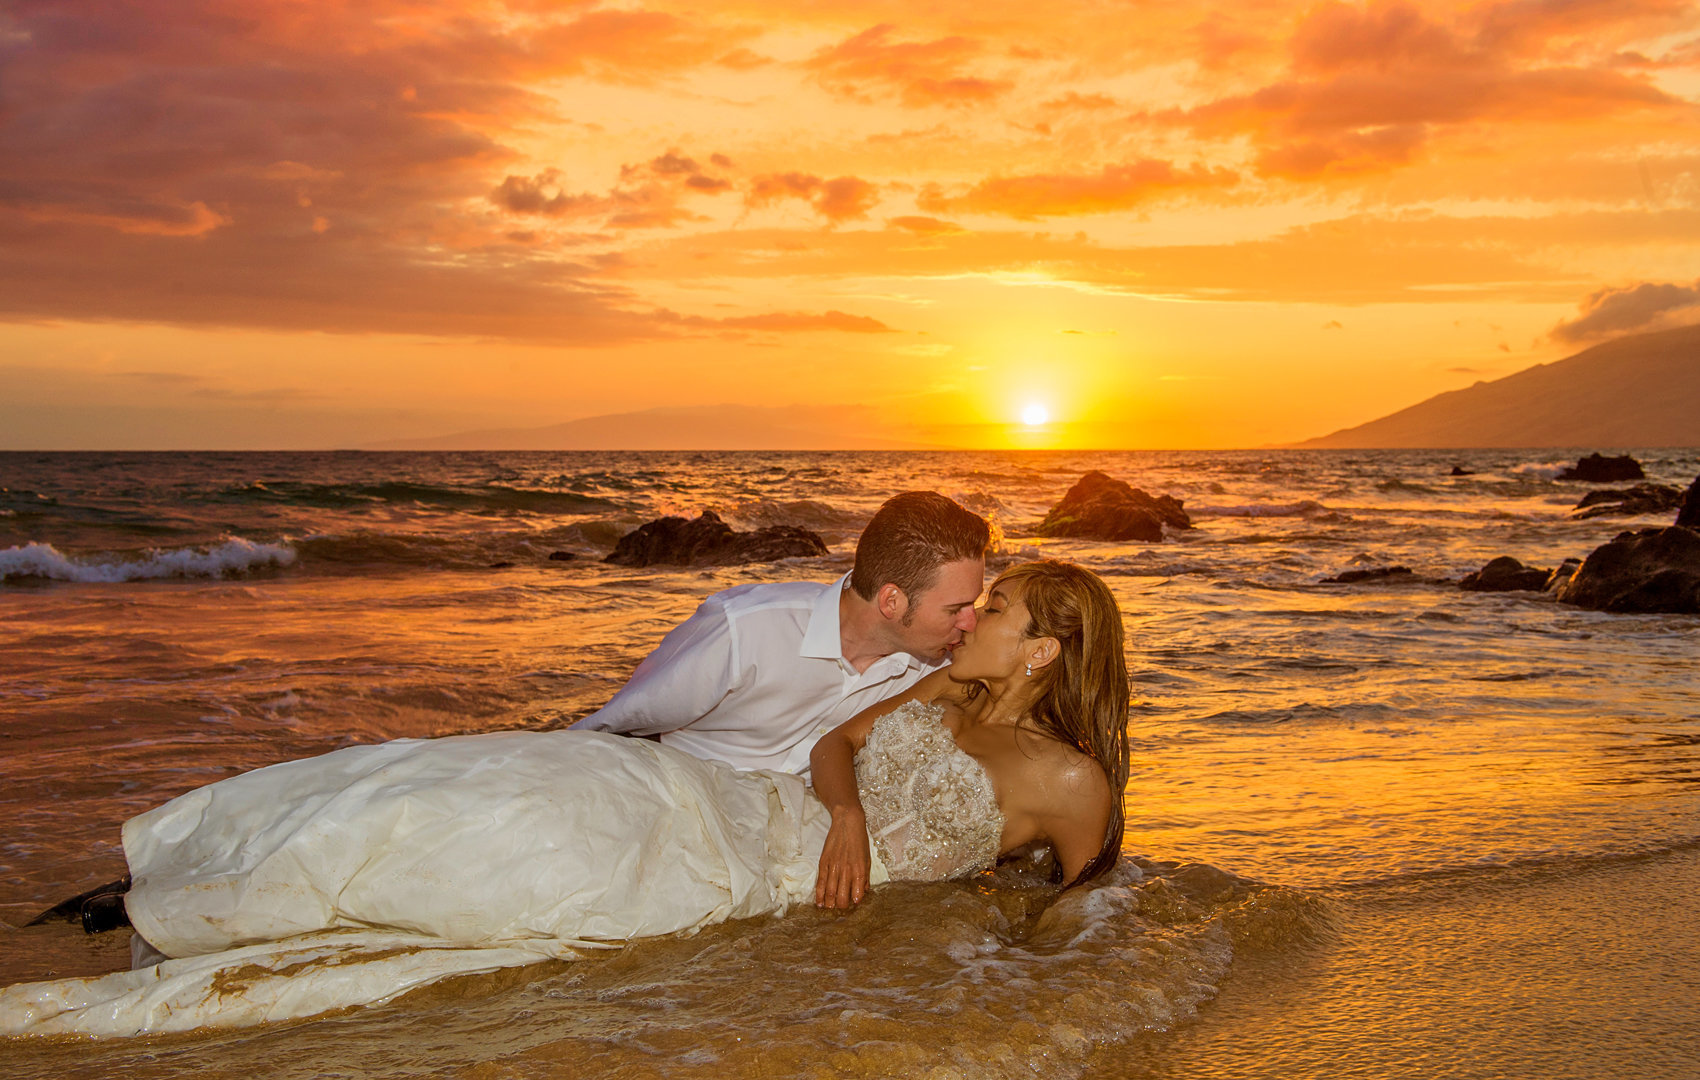 Rolling on the sand in the water, they totally trash the dress for the camera.